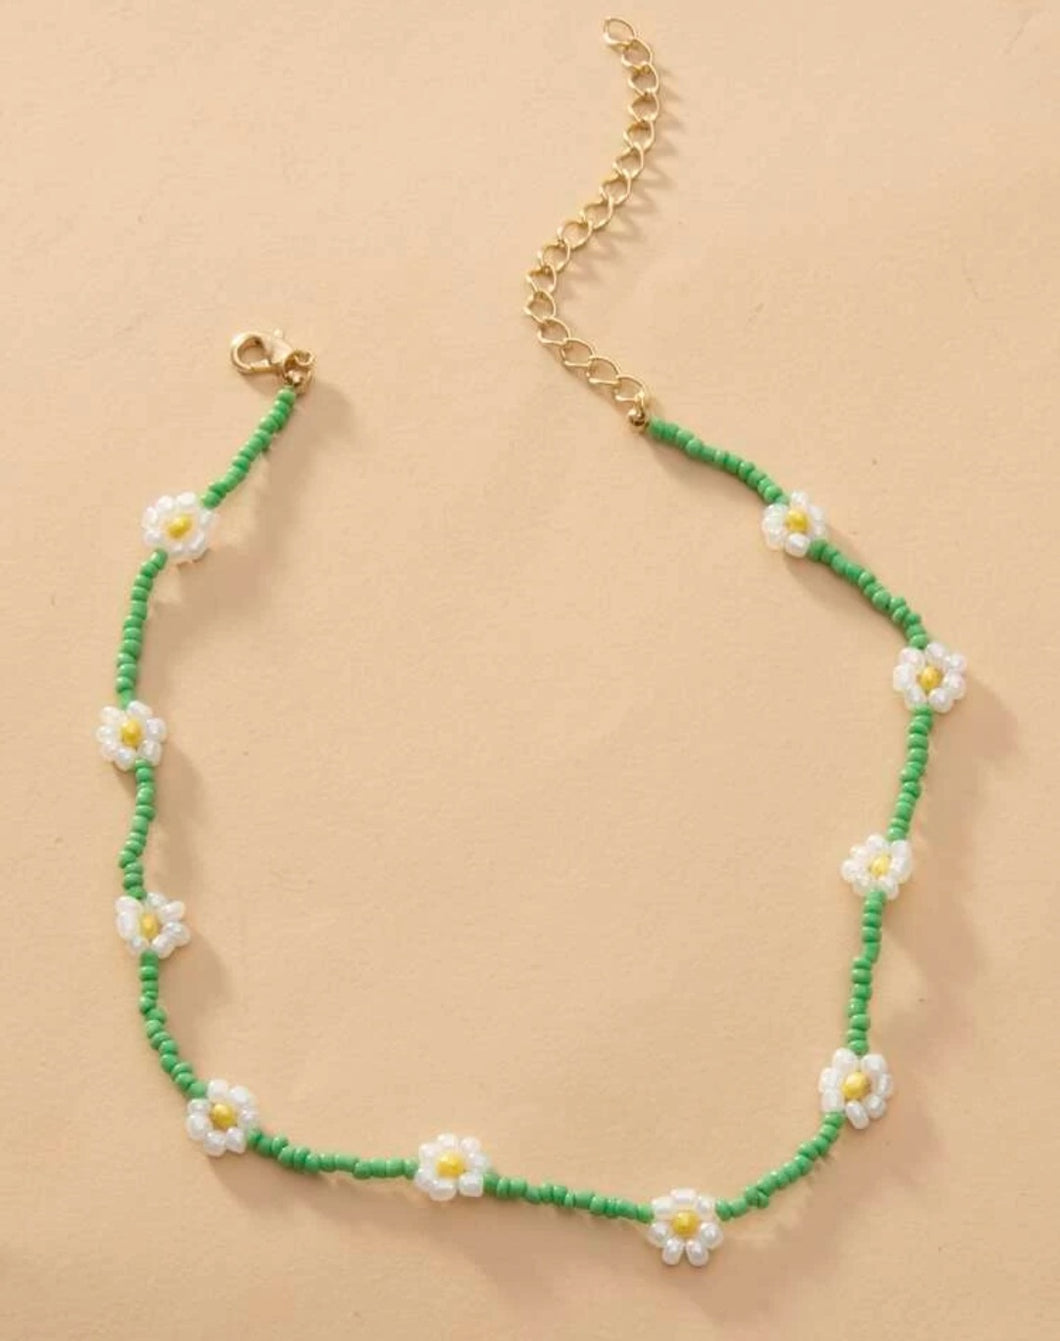 Green and White Delicate Daisy Necklace